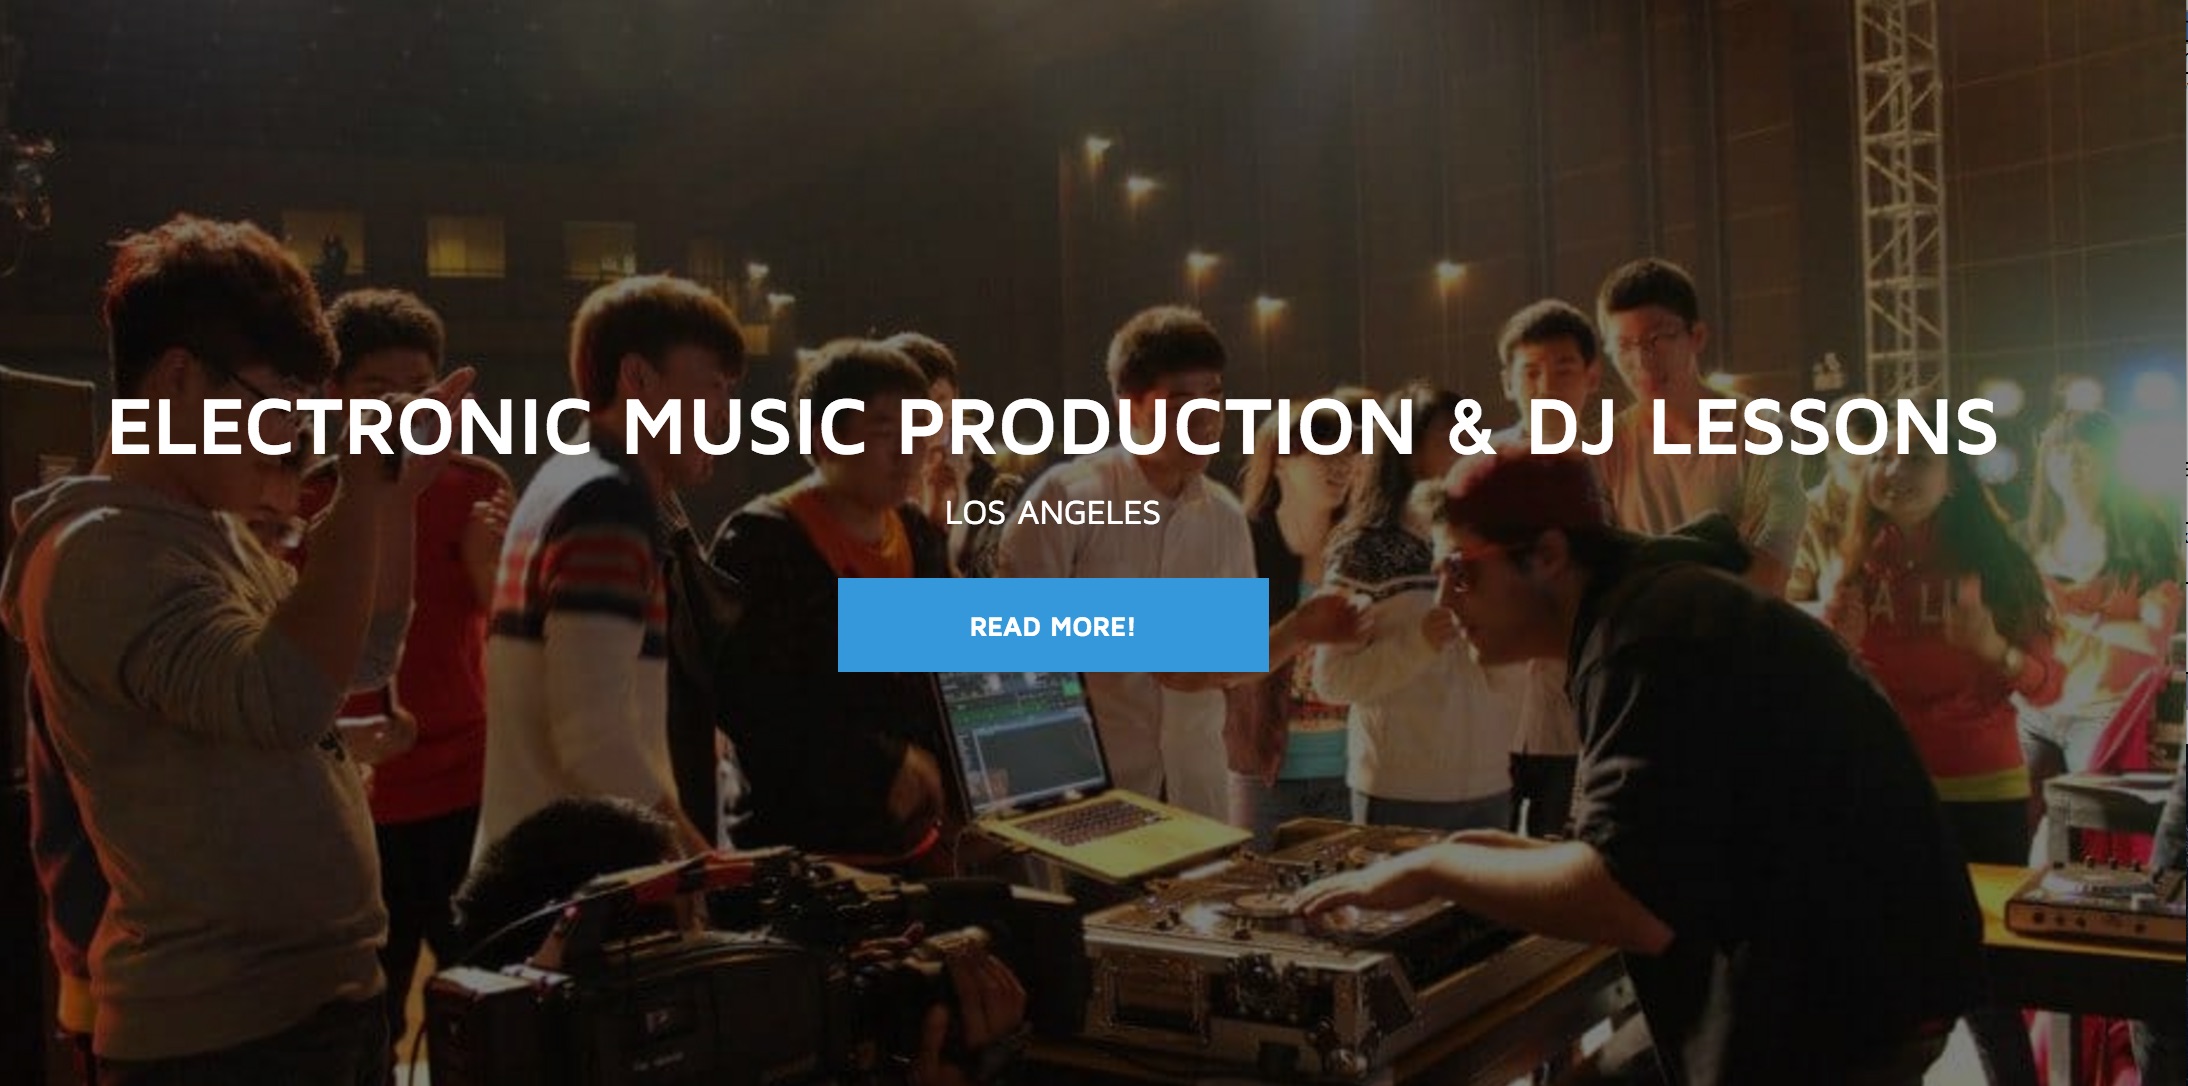 DJ lessons in Los Angeles - Red Pelican Music